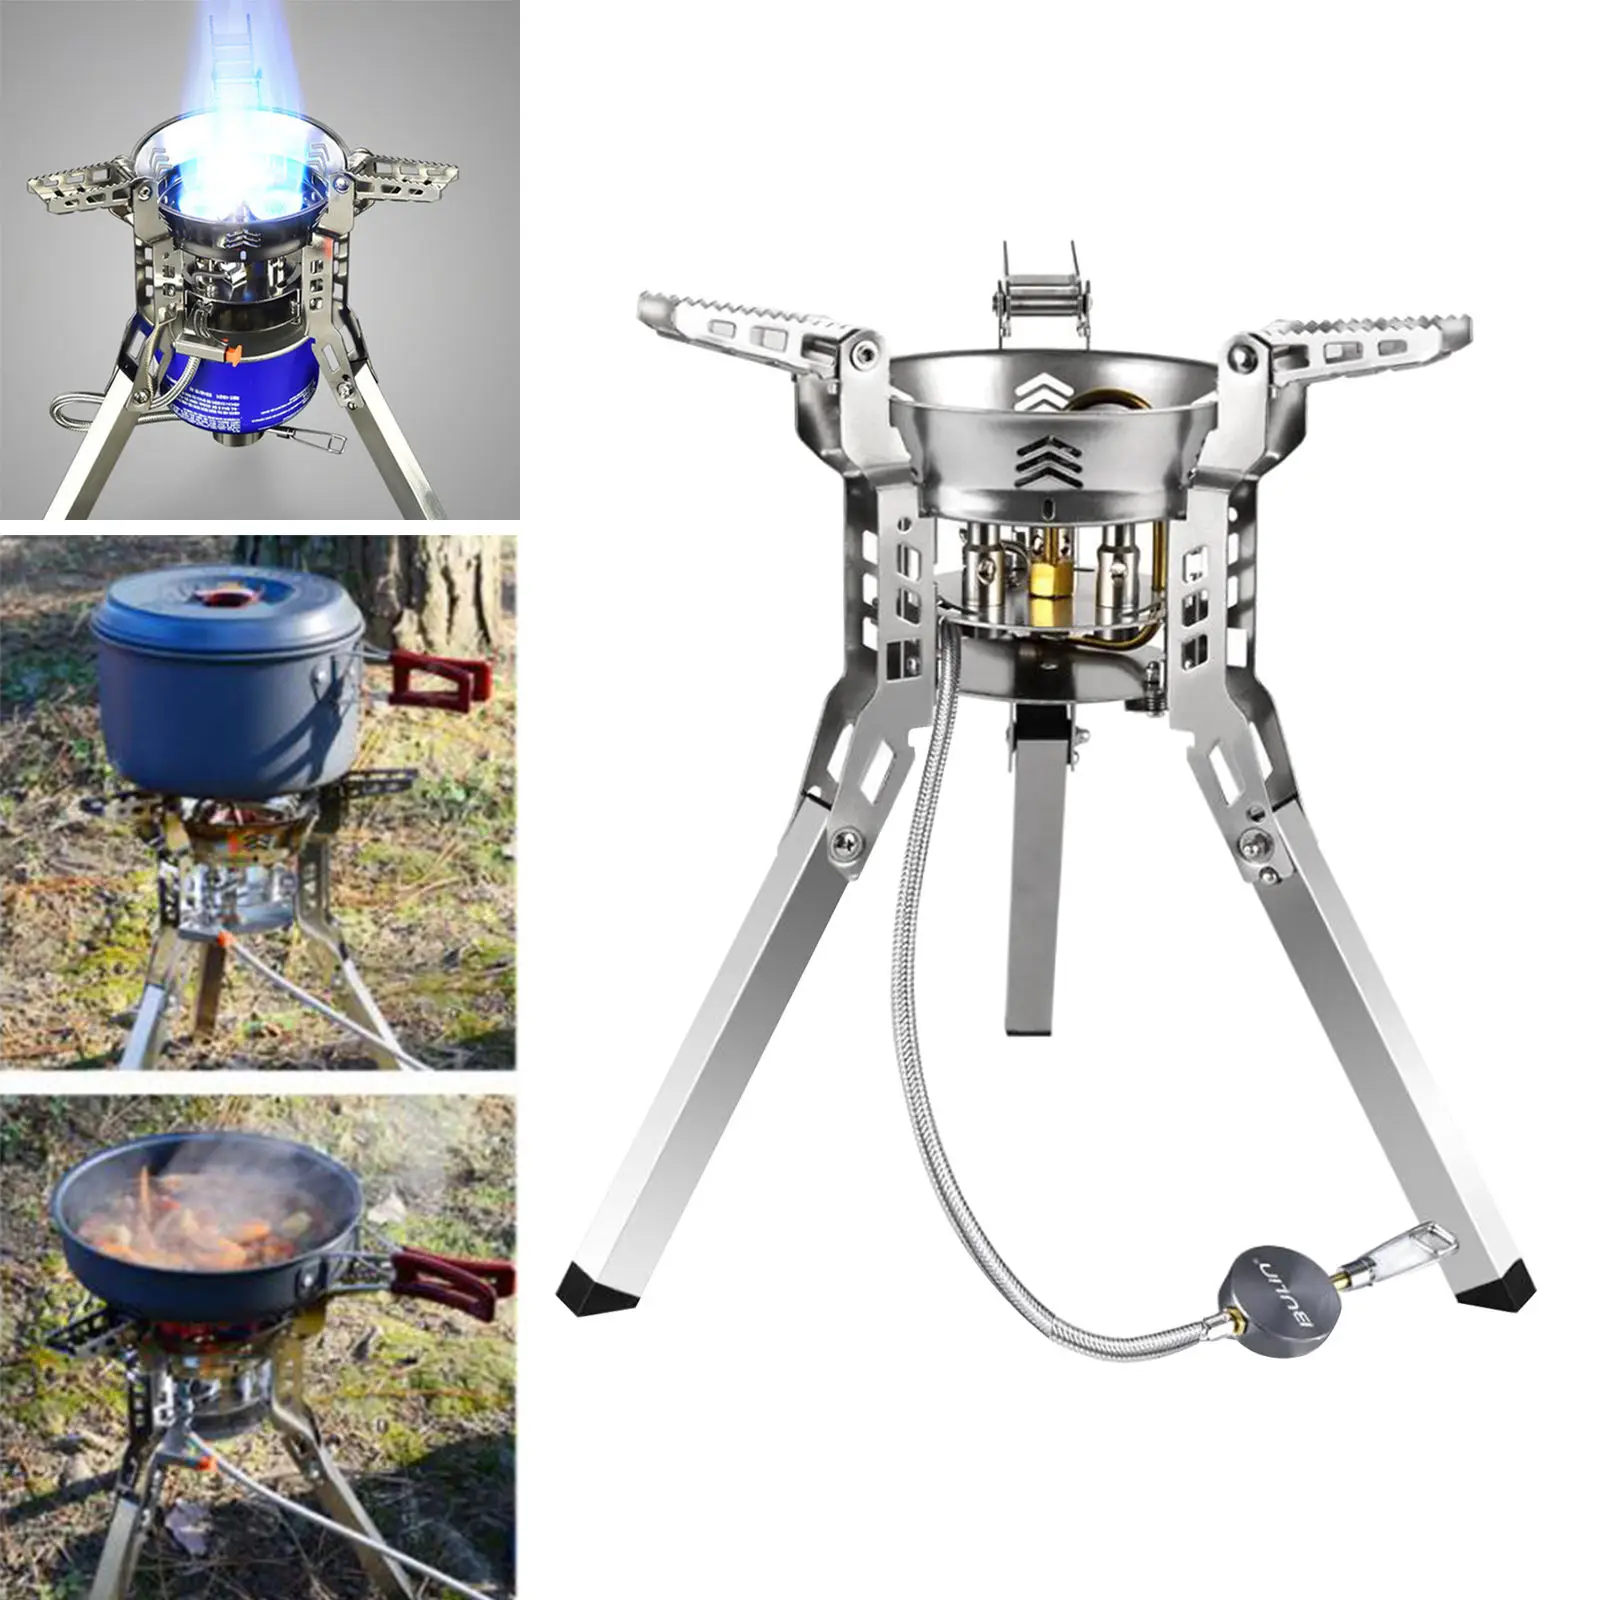 6800W Gas Stove Camping Burner Strong Fire Outdoor Camp Cooker for Outdoor Camping Hiking Picnic Fishing Gear Cooker